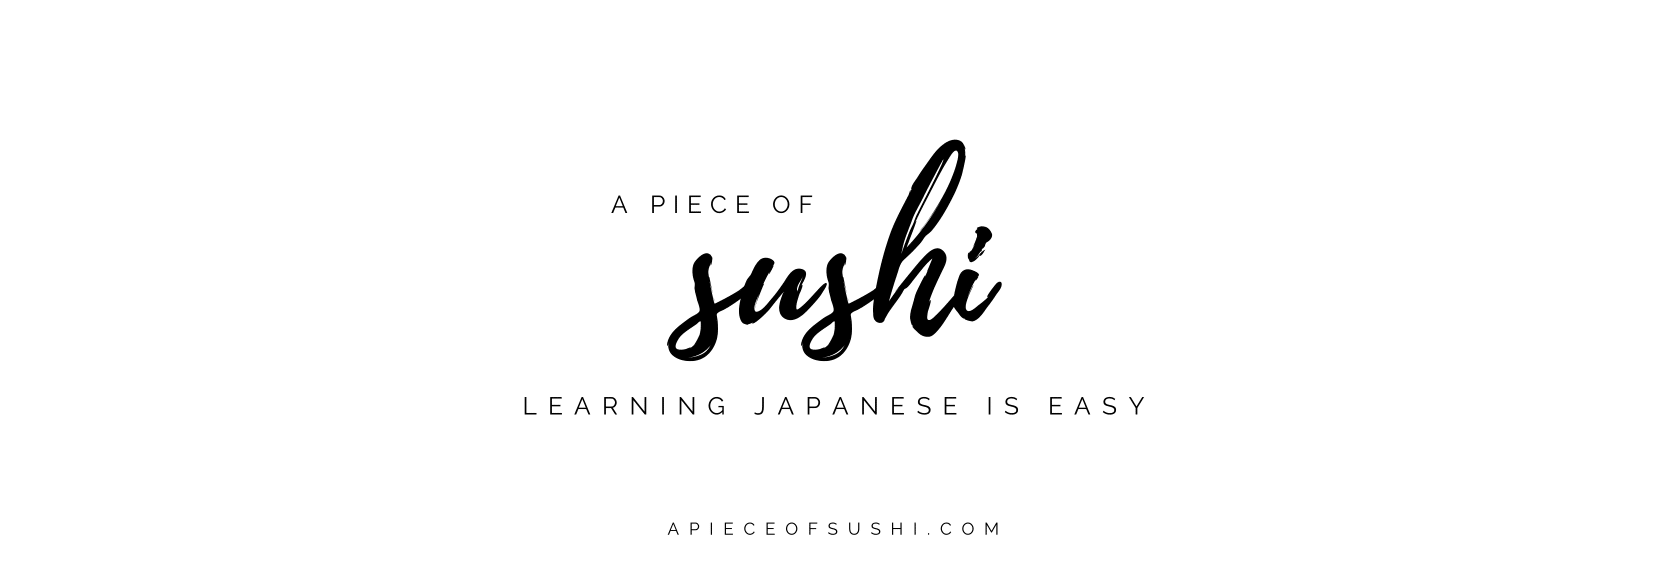 A PIECE OF SUSHI